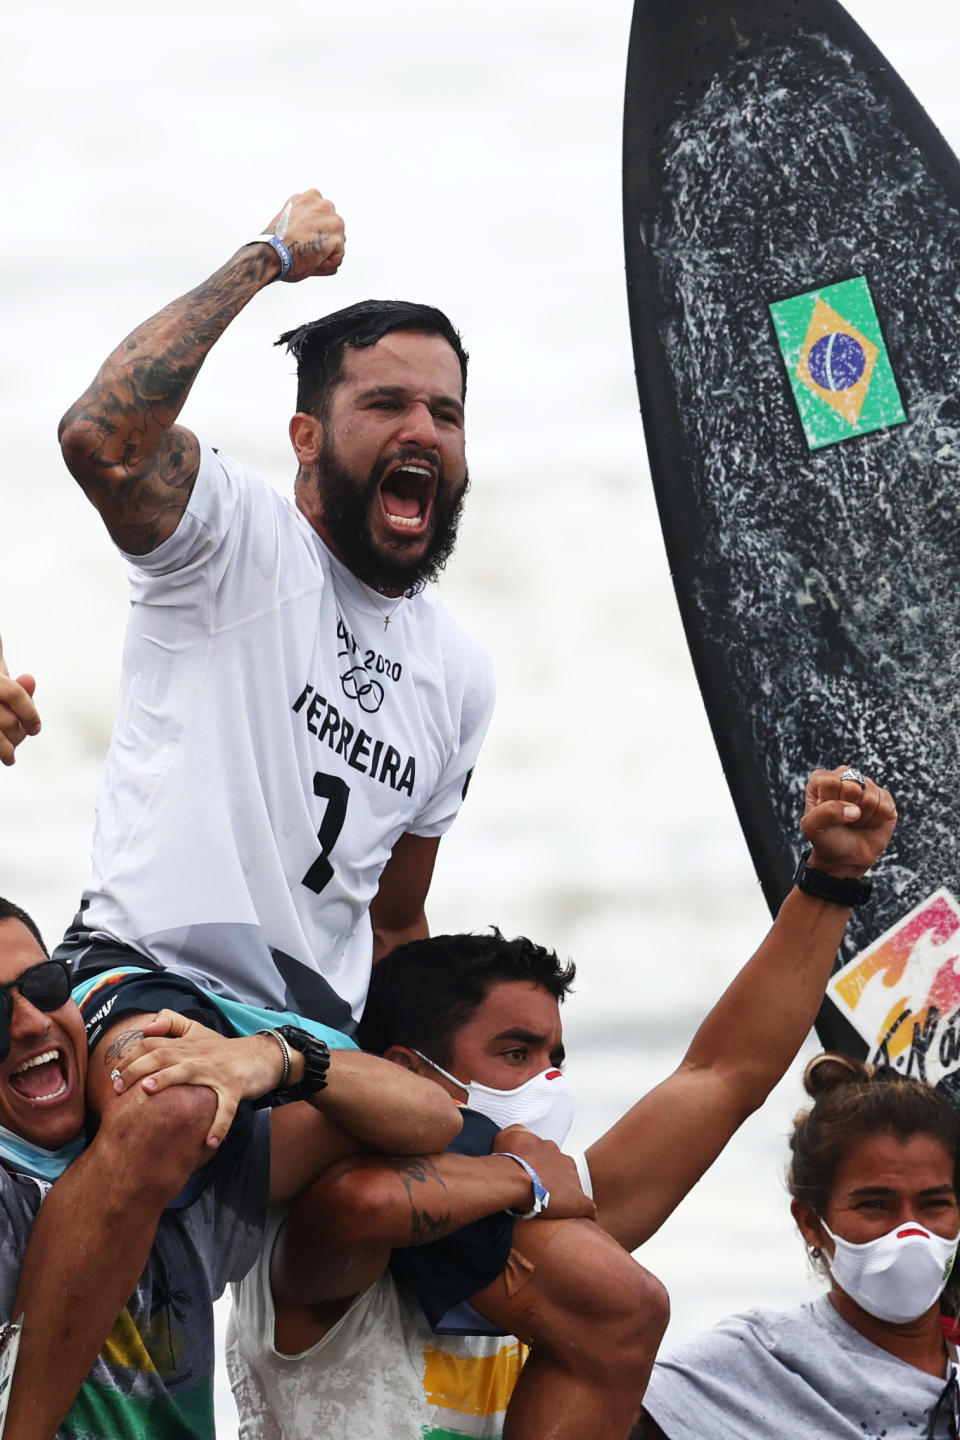 <p>ICHINOMIYA, JAPAN - JULY 27: Italo Ferreira of Team Brazil shows emotion as he is chaired off the beach after winning the Gold Medal in the menâs Surfing final match against Kanoa Igarashi of Team Japan on day four of the Tokyo 2020 Olympic Games at Tsurigasaki Surfing Beach on July 27, 2021 in Ichinomiya, Chiba, Japan. (Photo by Ryan Pierse/Getty Images)</p> 